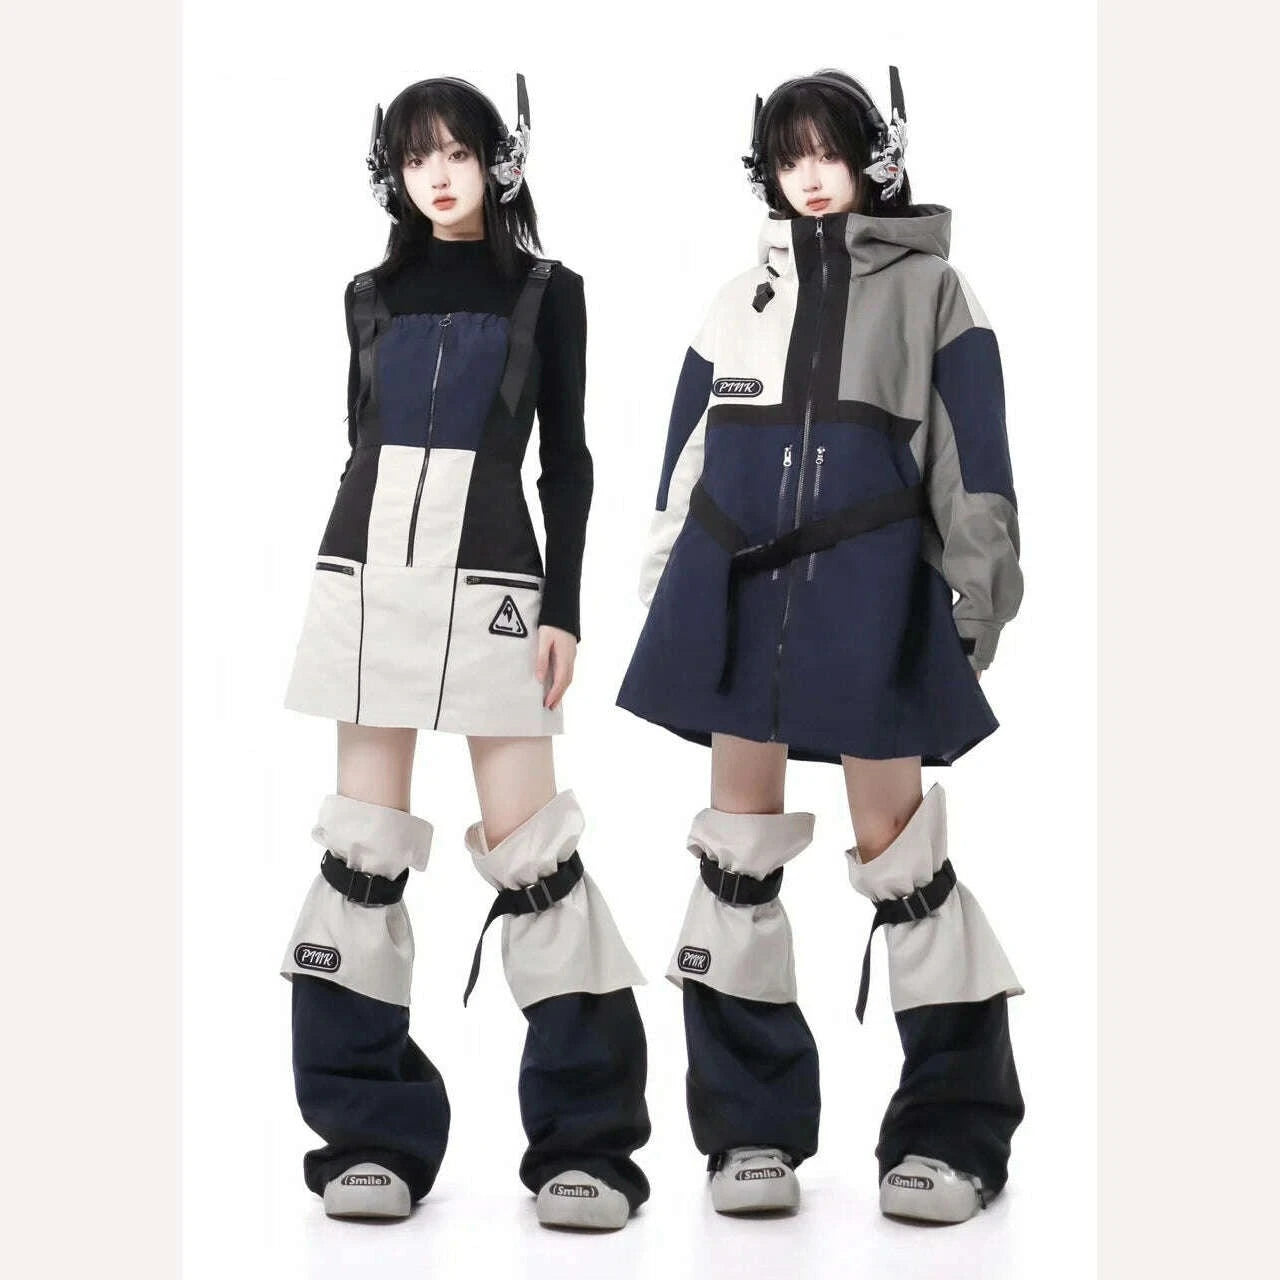 KIMLUD, Harajuku Y2g Color Matching Sweet Cool Girl Hooded Coat Skirt Sets Loose Slim Suspender Skirt Street Punk Hot Girl Two-Piece Set, KIMLUD Women's Clothes